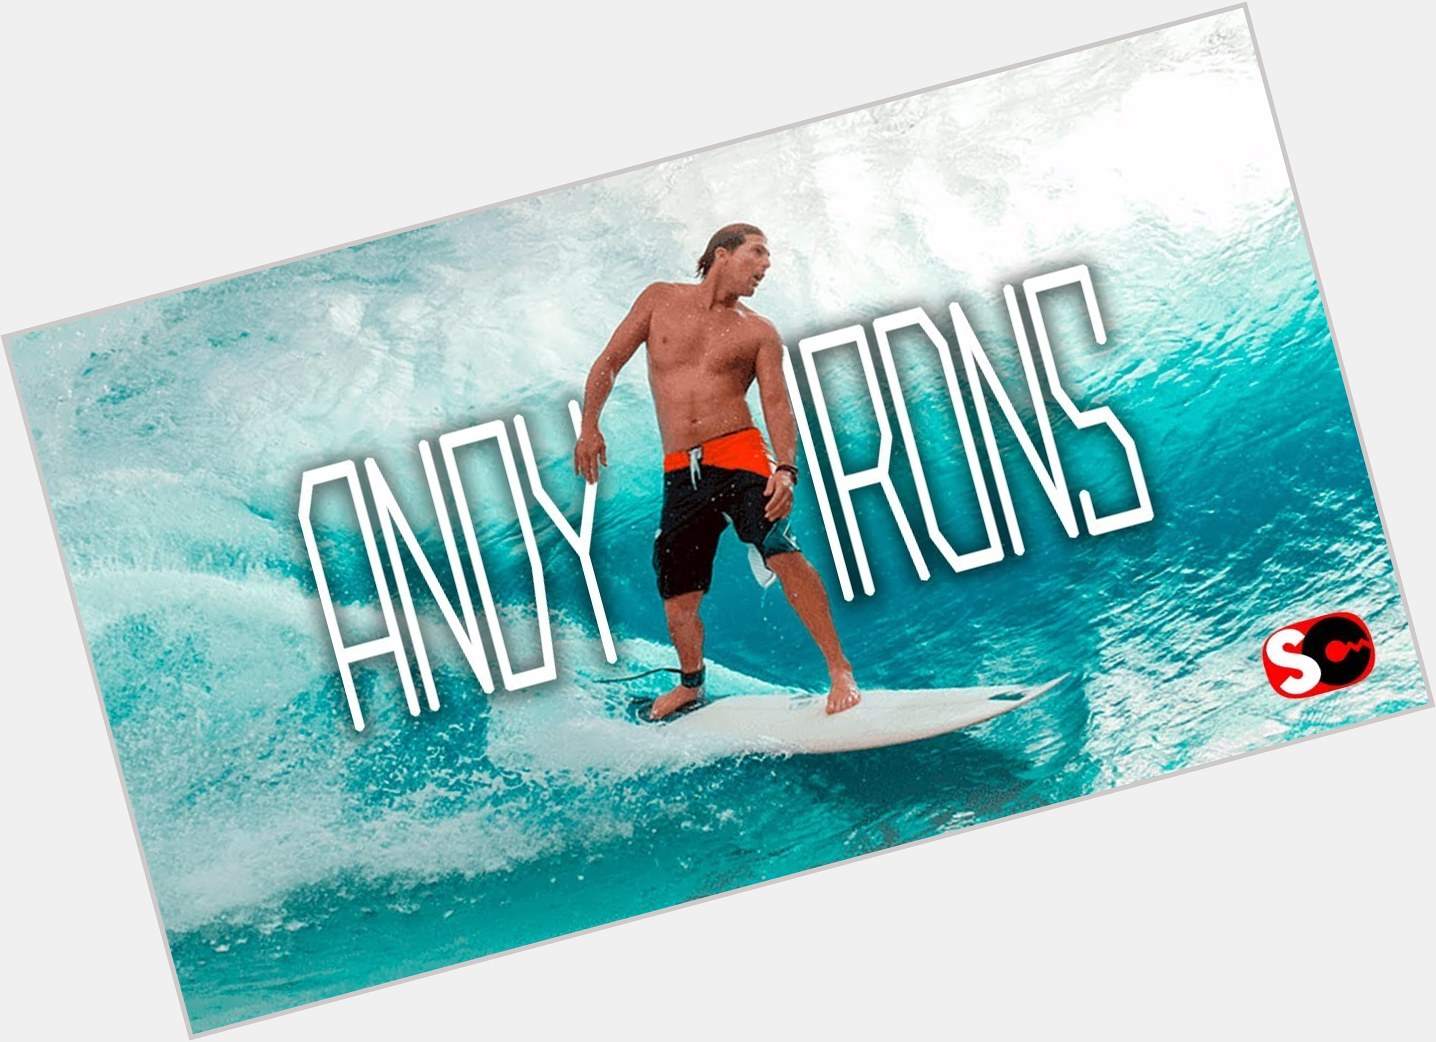 Andy Irons dating 2